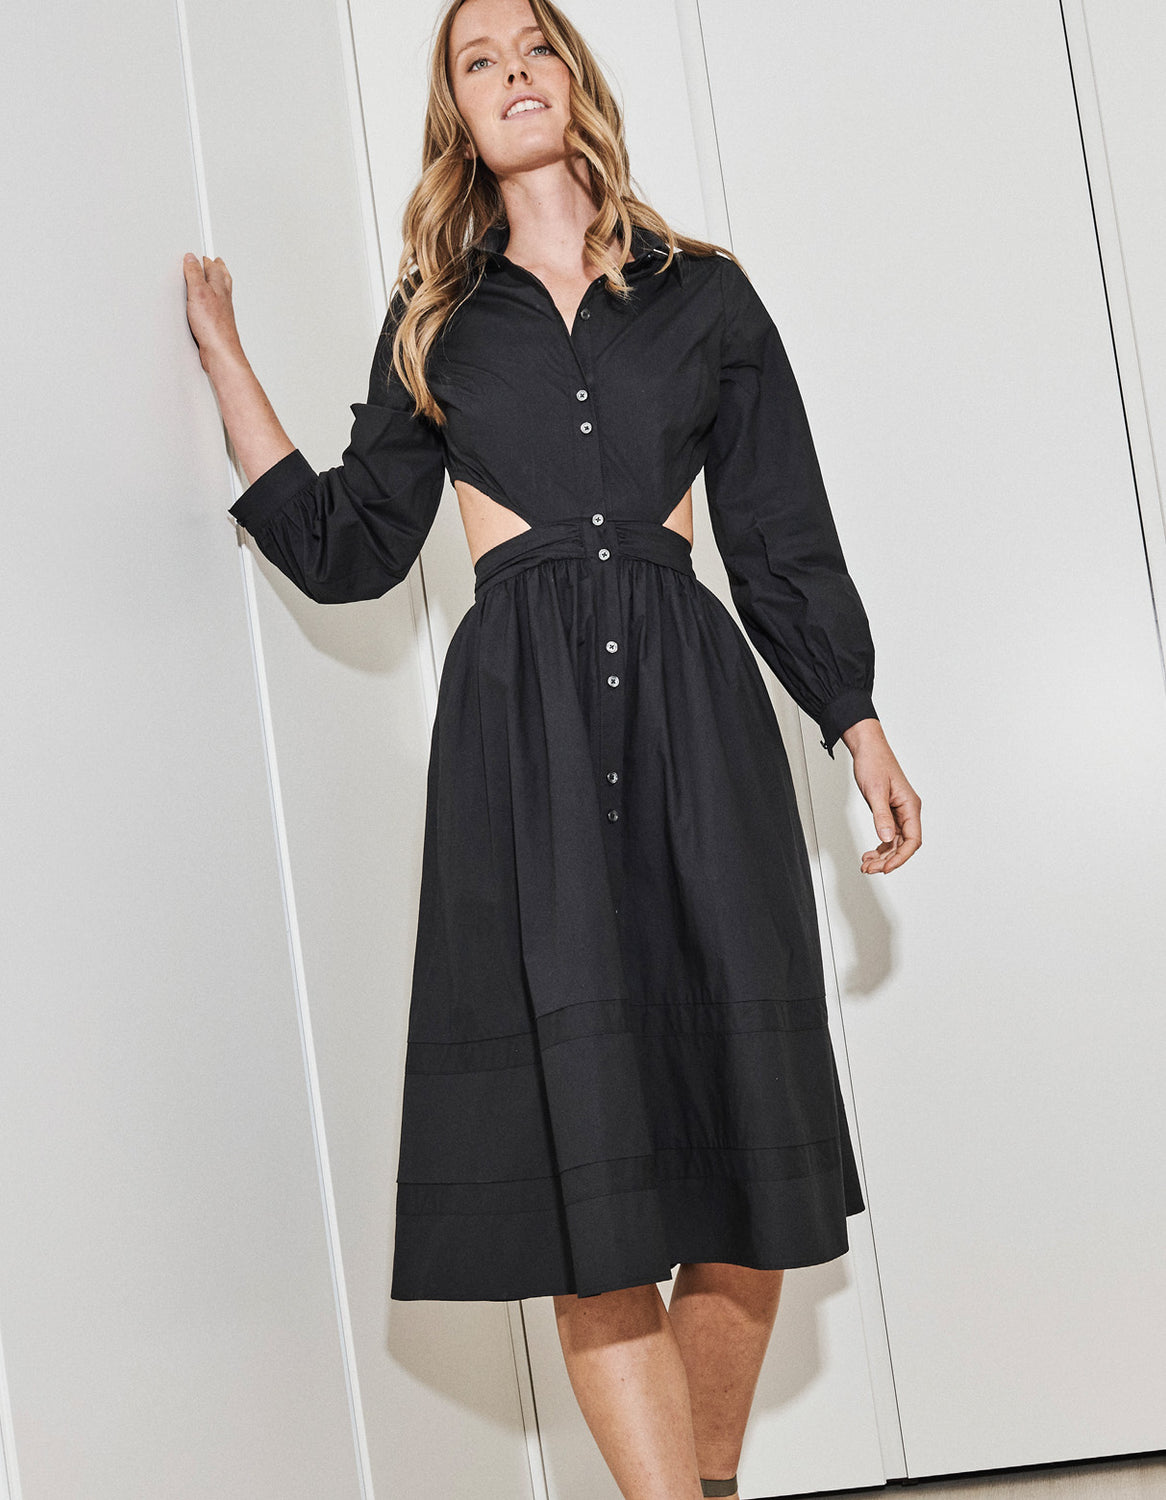 Look 12 - The Cut-Out Shirt Dress in Jet